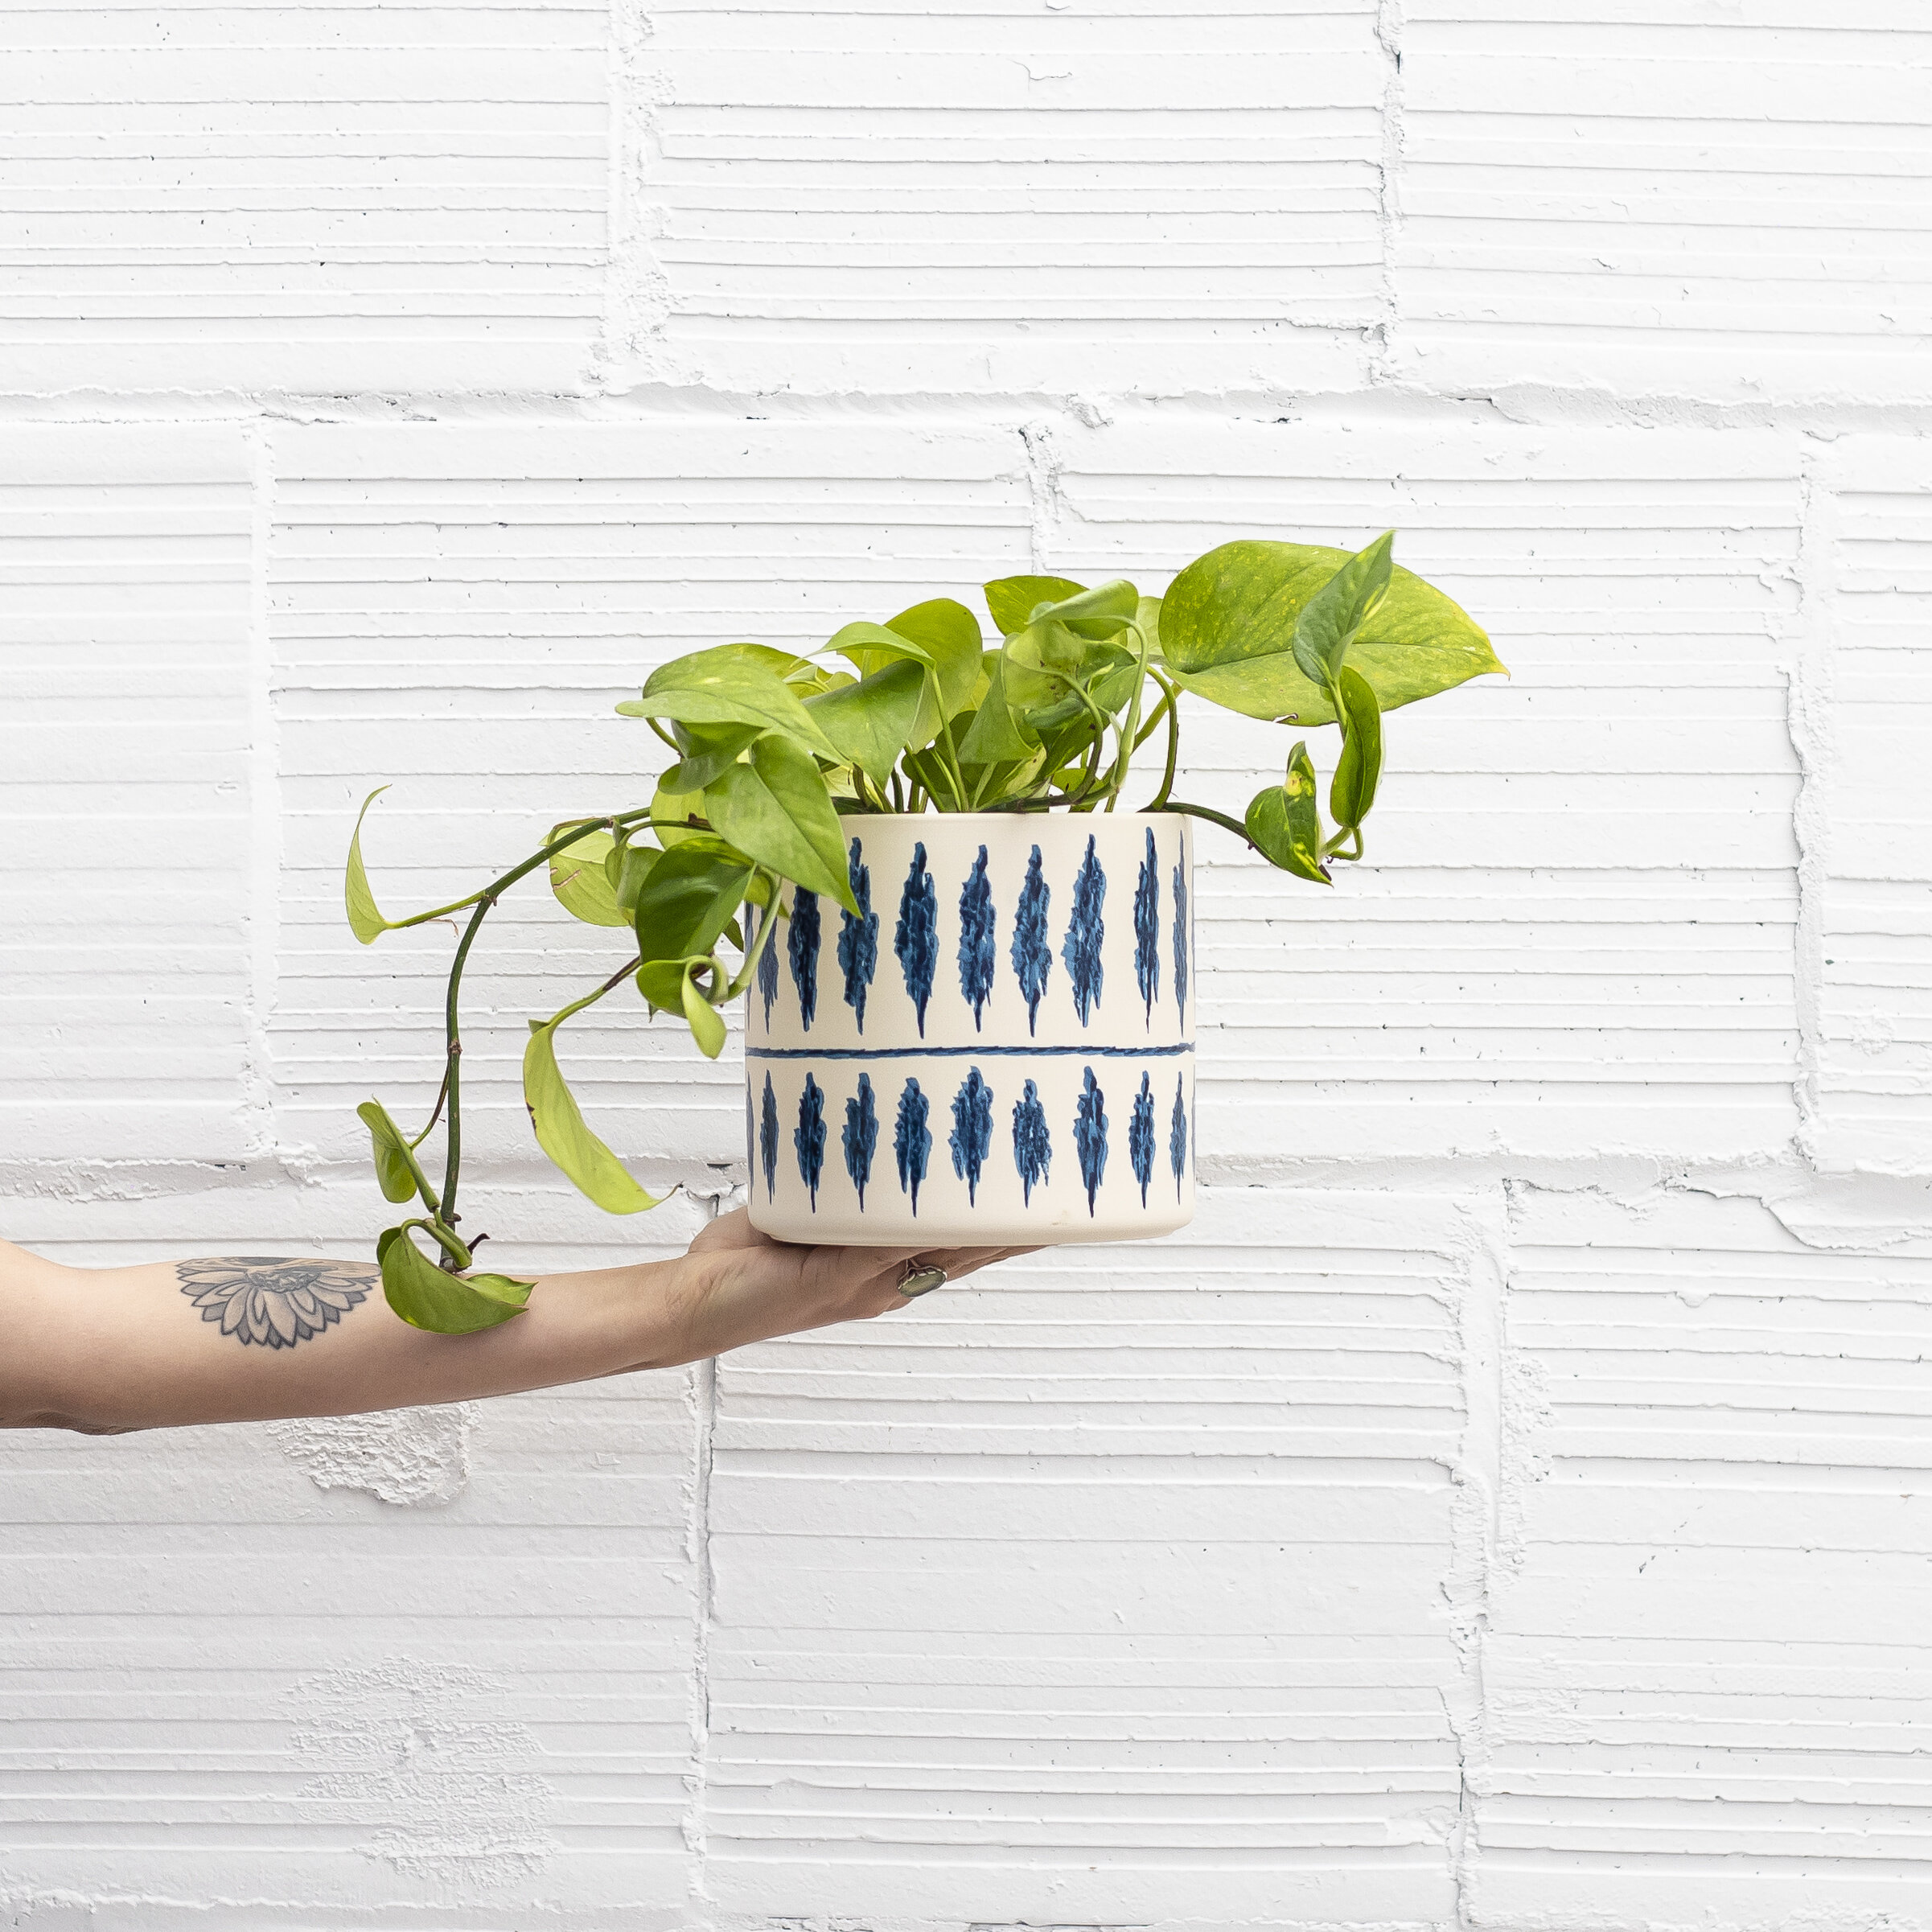 A green Pothos plant in a white and navy blue patterned pot being held up by a hand in front of a white concrete wall